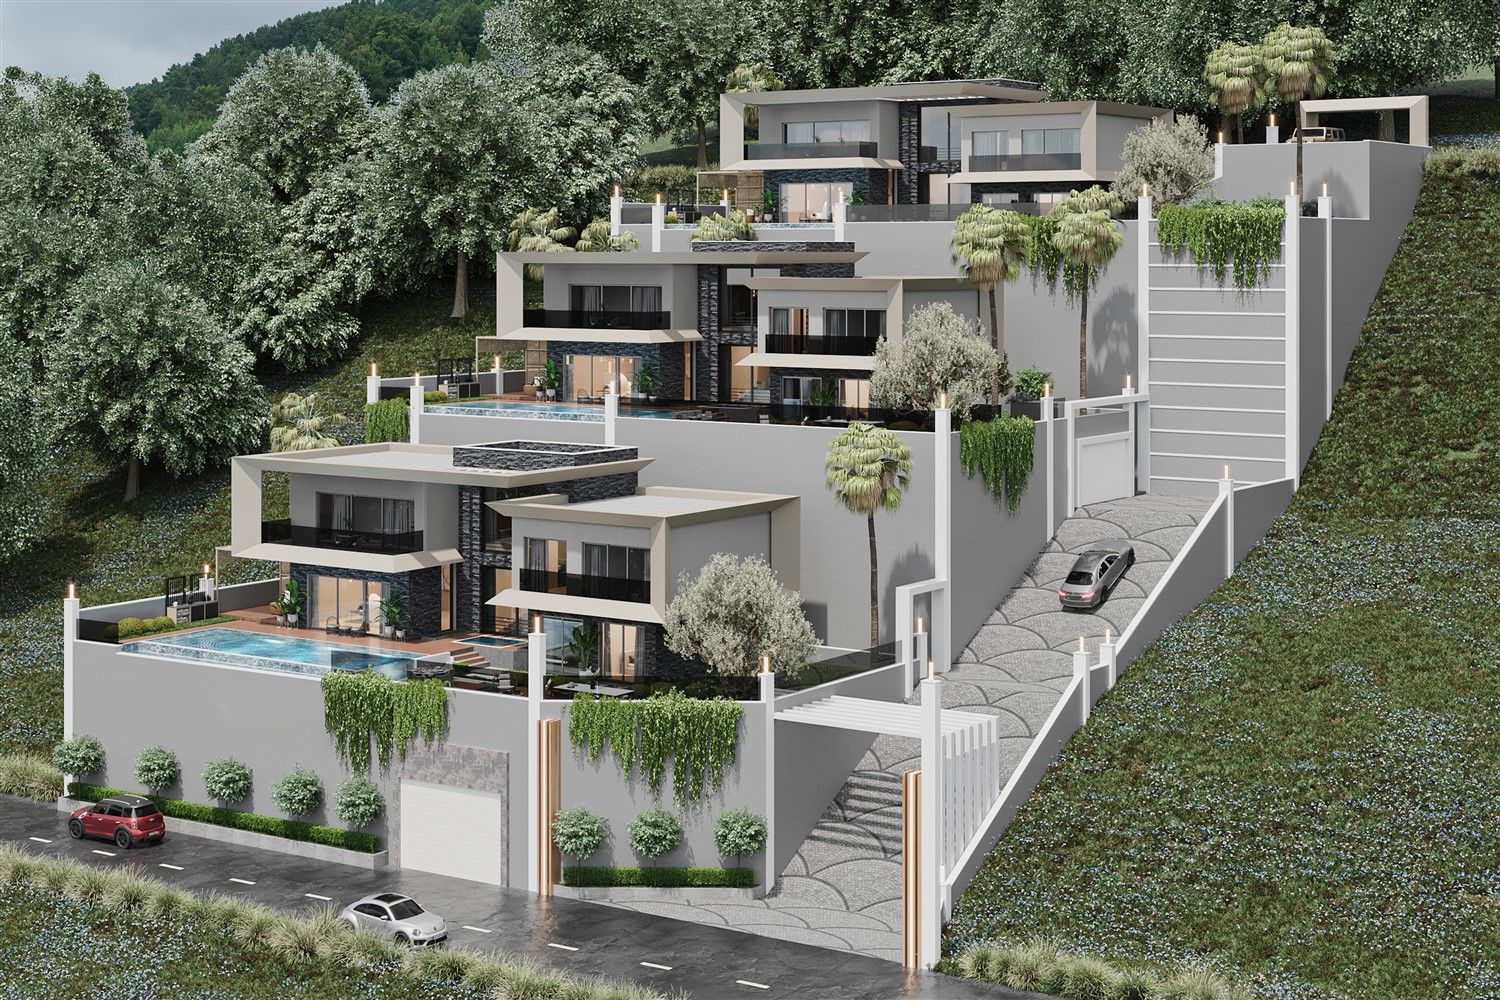 Luxury villa project in the most beautiful location of Alanya - Tepe district